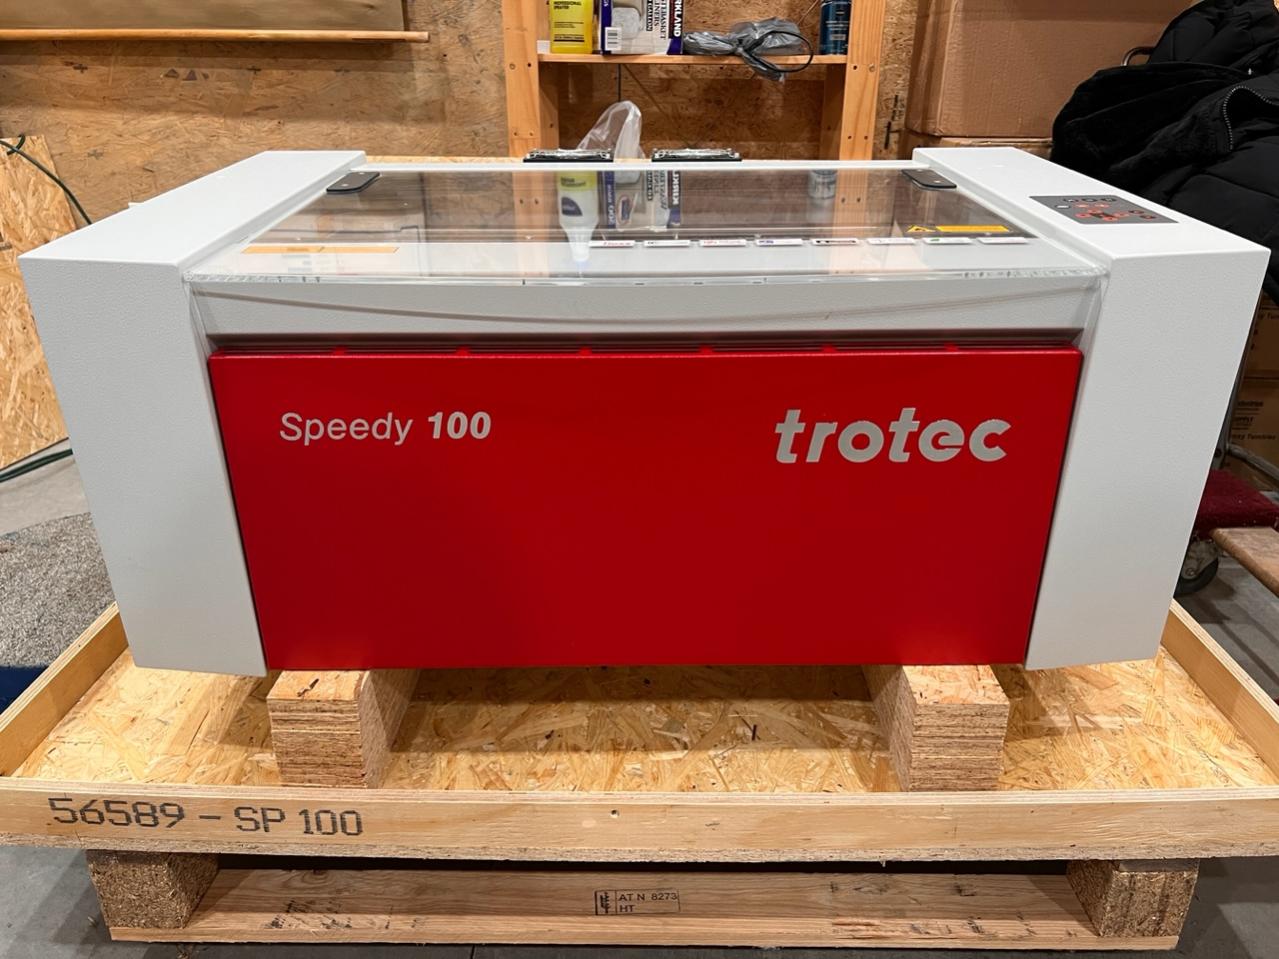 ➤ Used Trotec for sale on  - many listings online now 🏷️